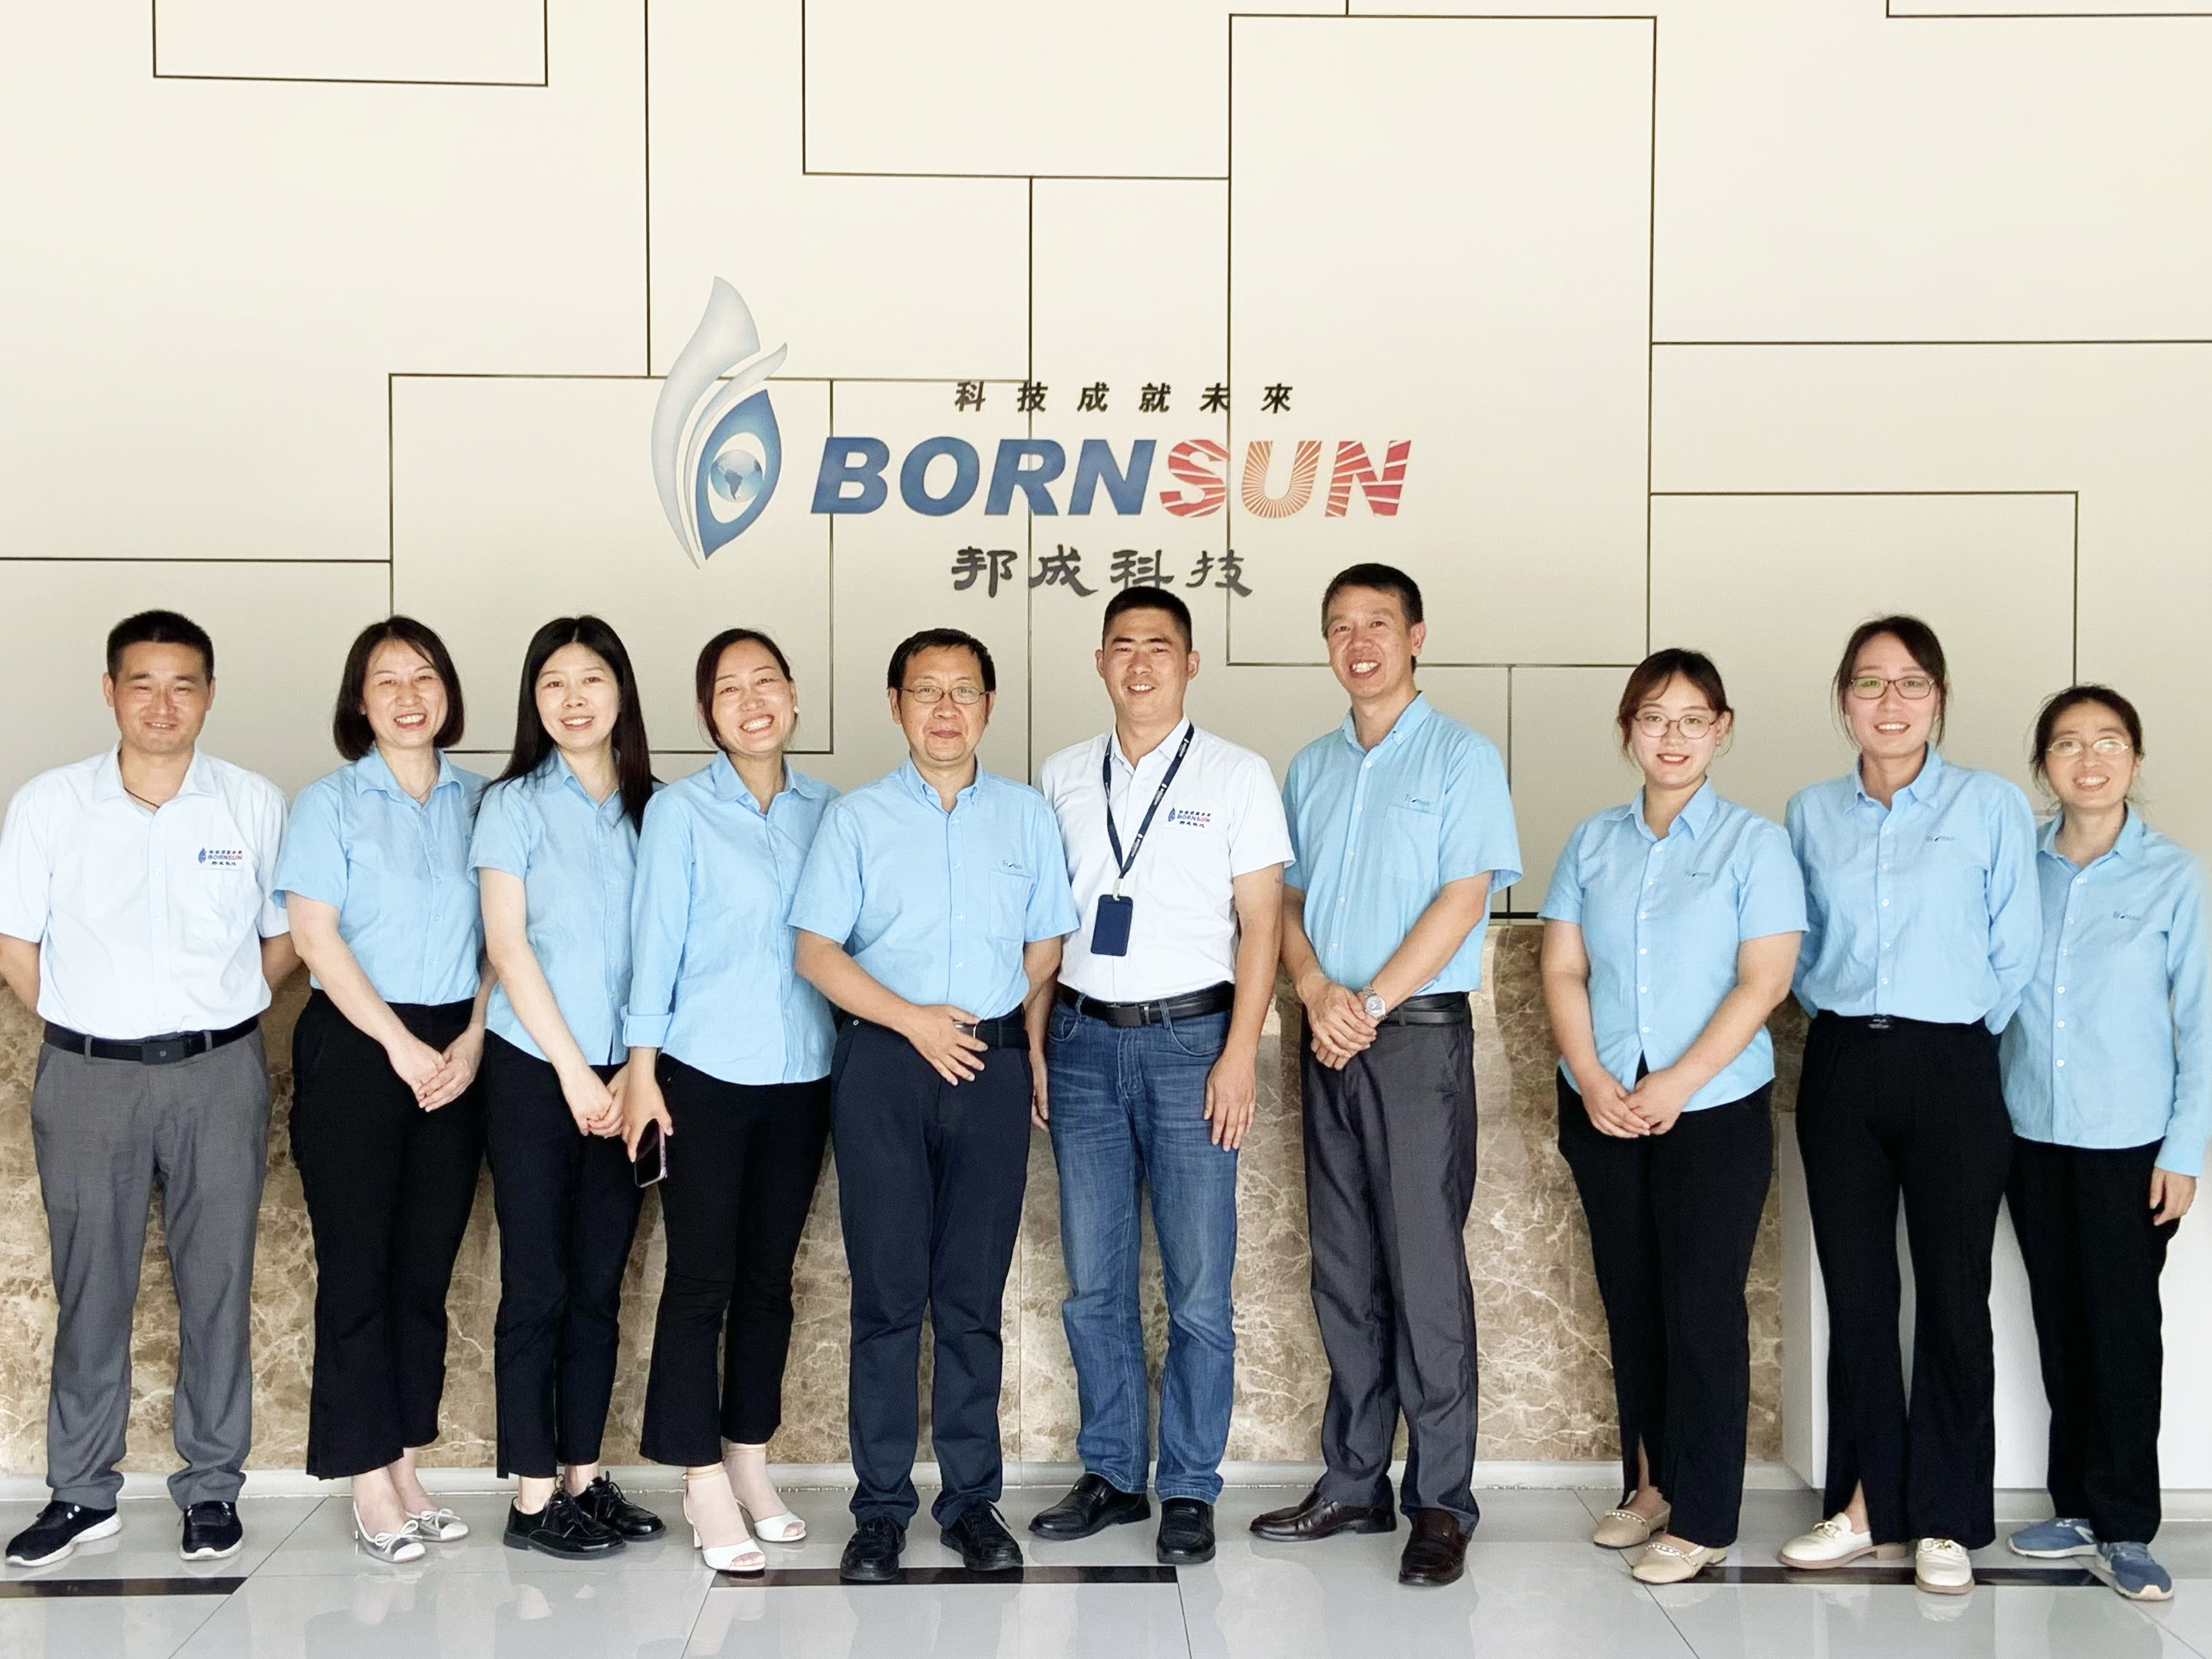 Welcome Frontan Corp to visit BORNSUN to exchange